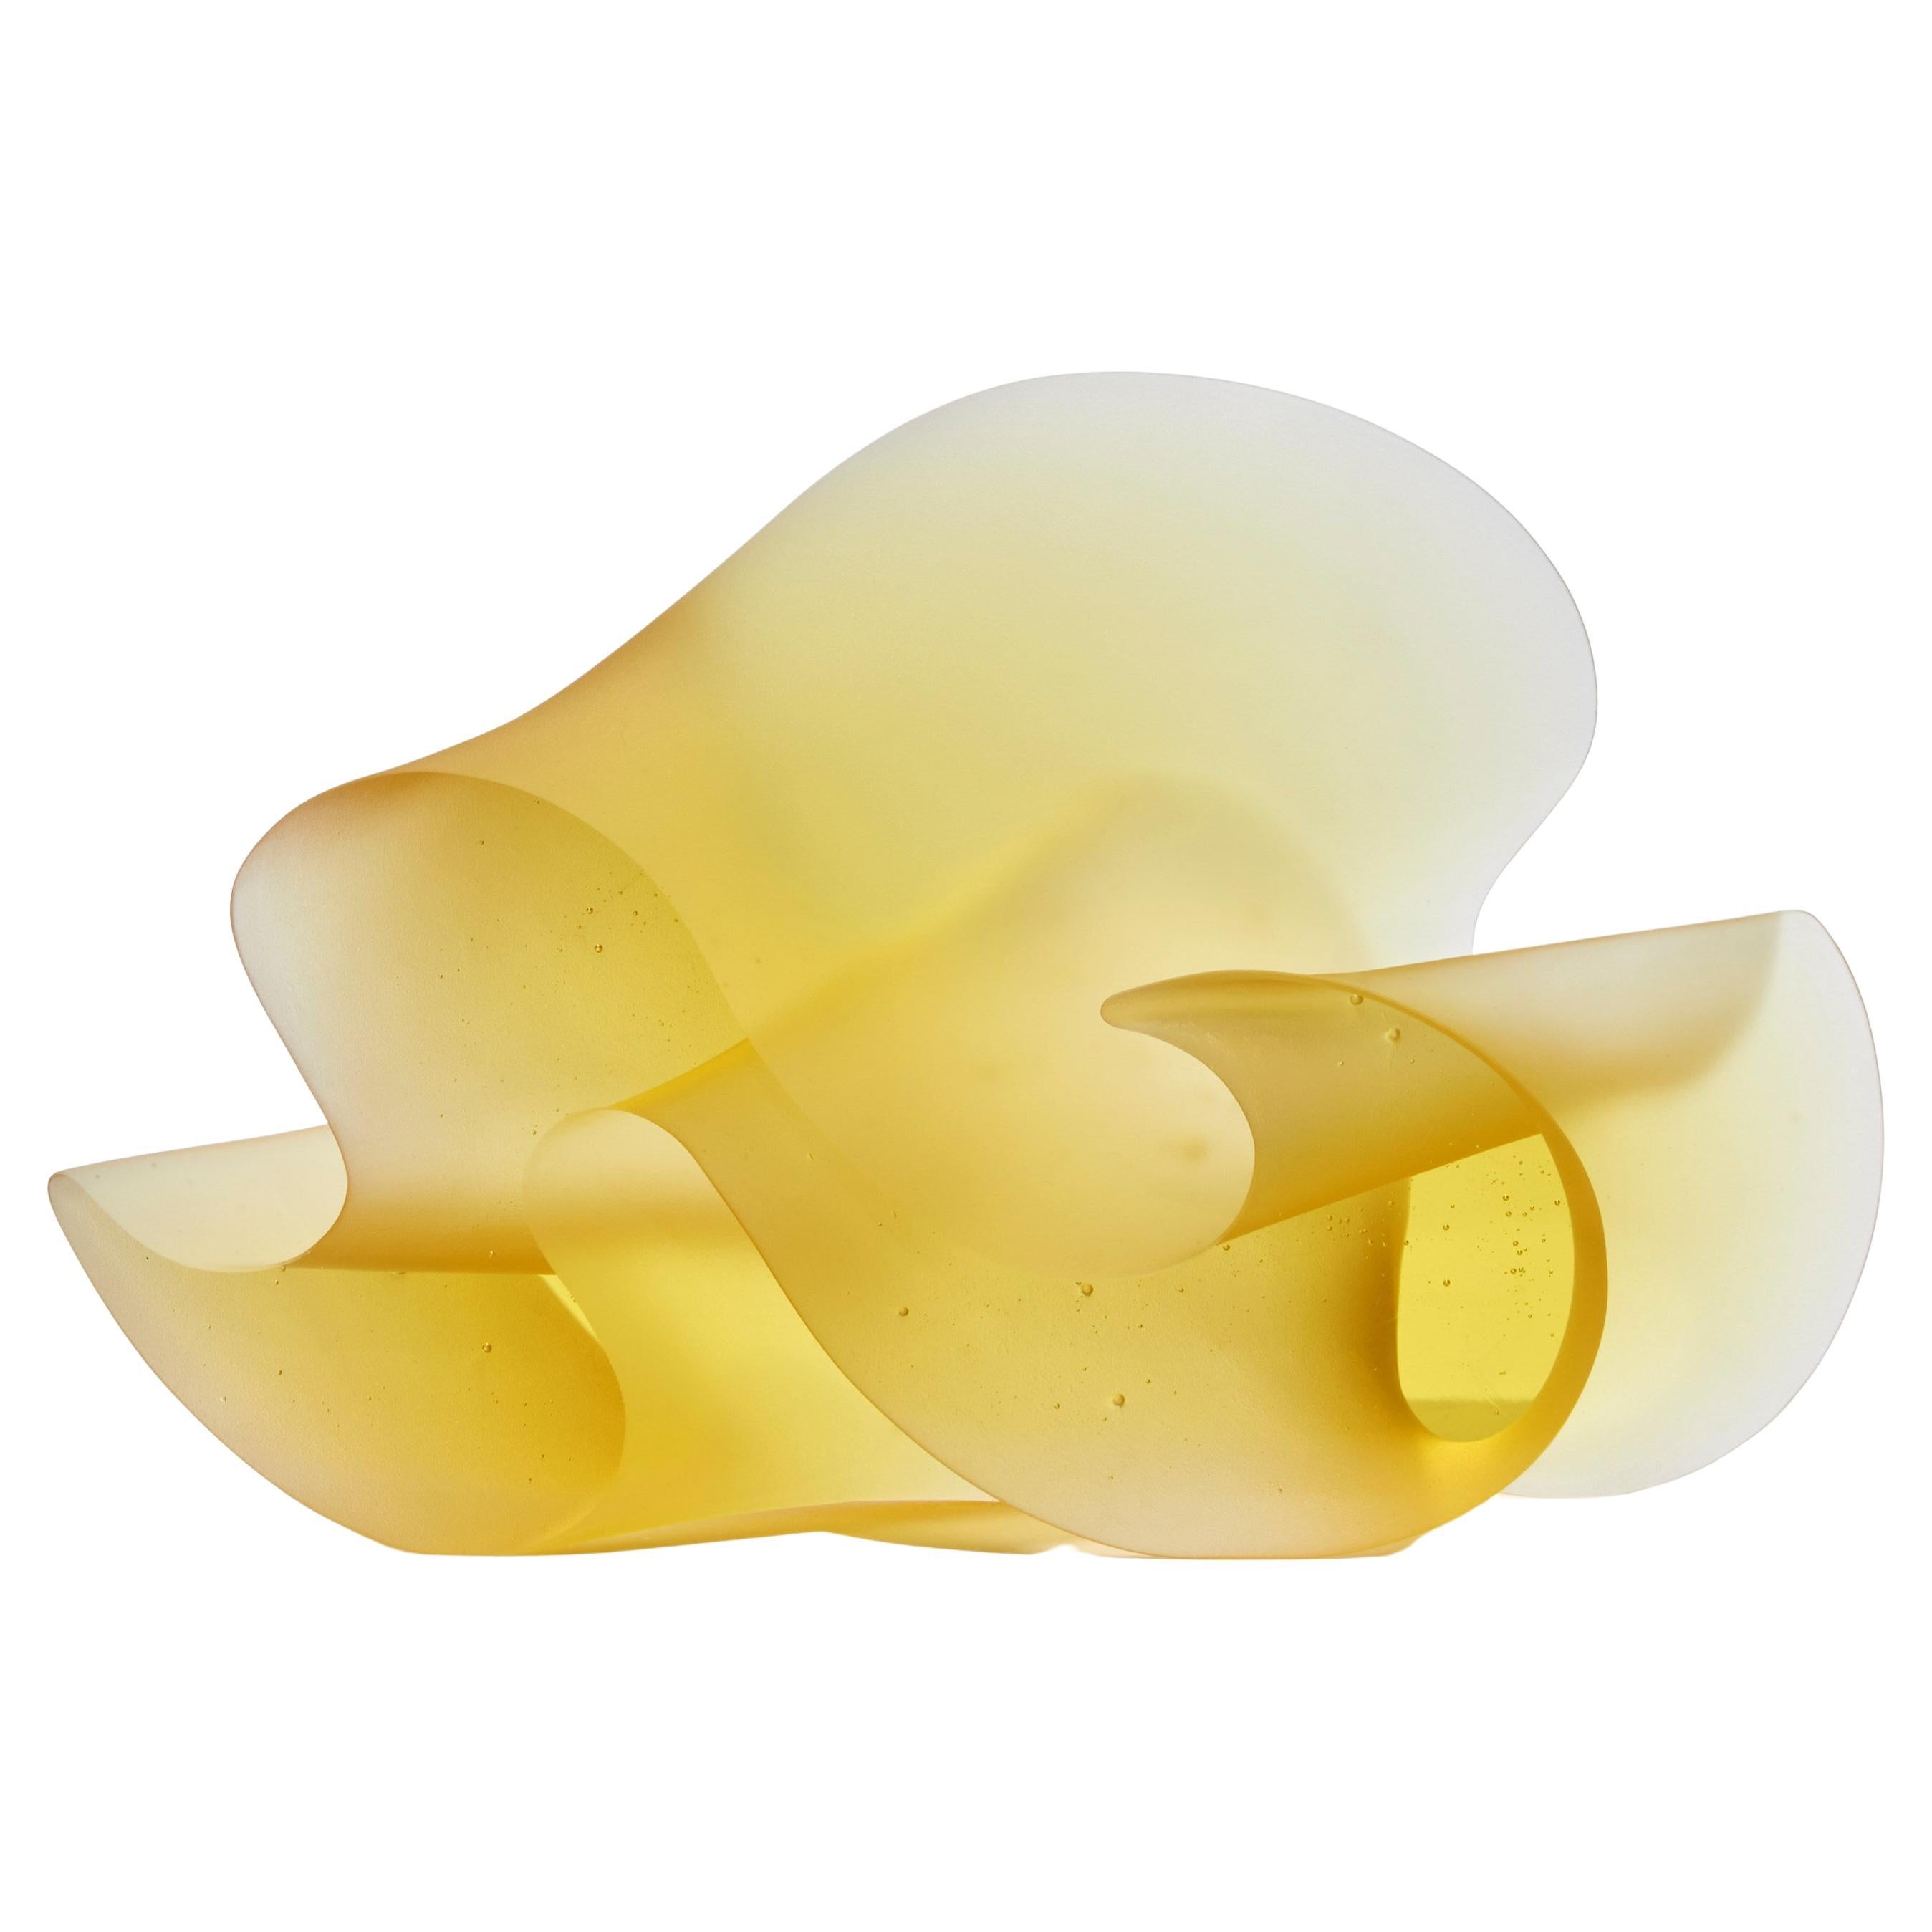 Flow Yellow, a Bright Gold / Yellow Solid Cast Glass Sculpture by Karin Mørch For Sale